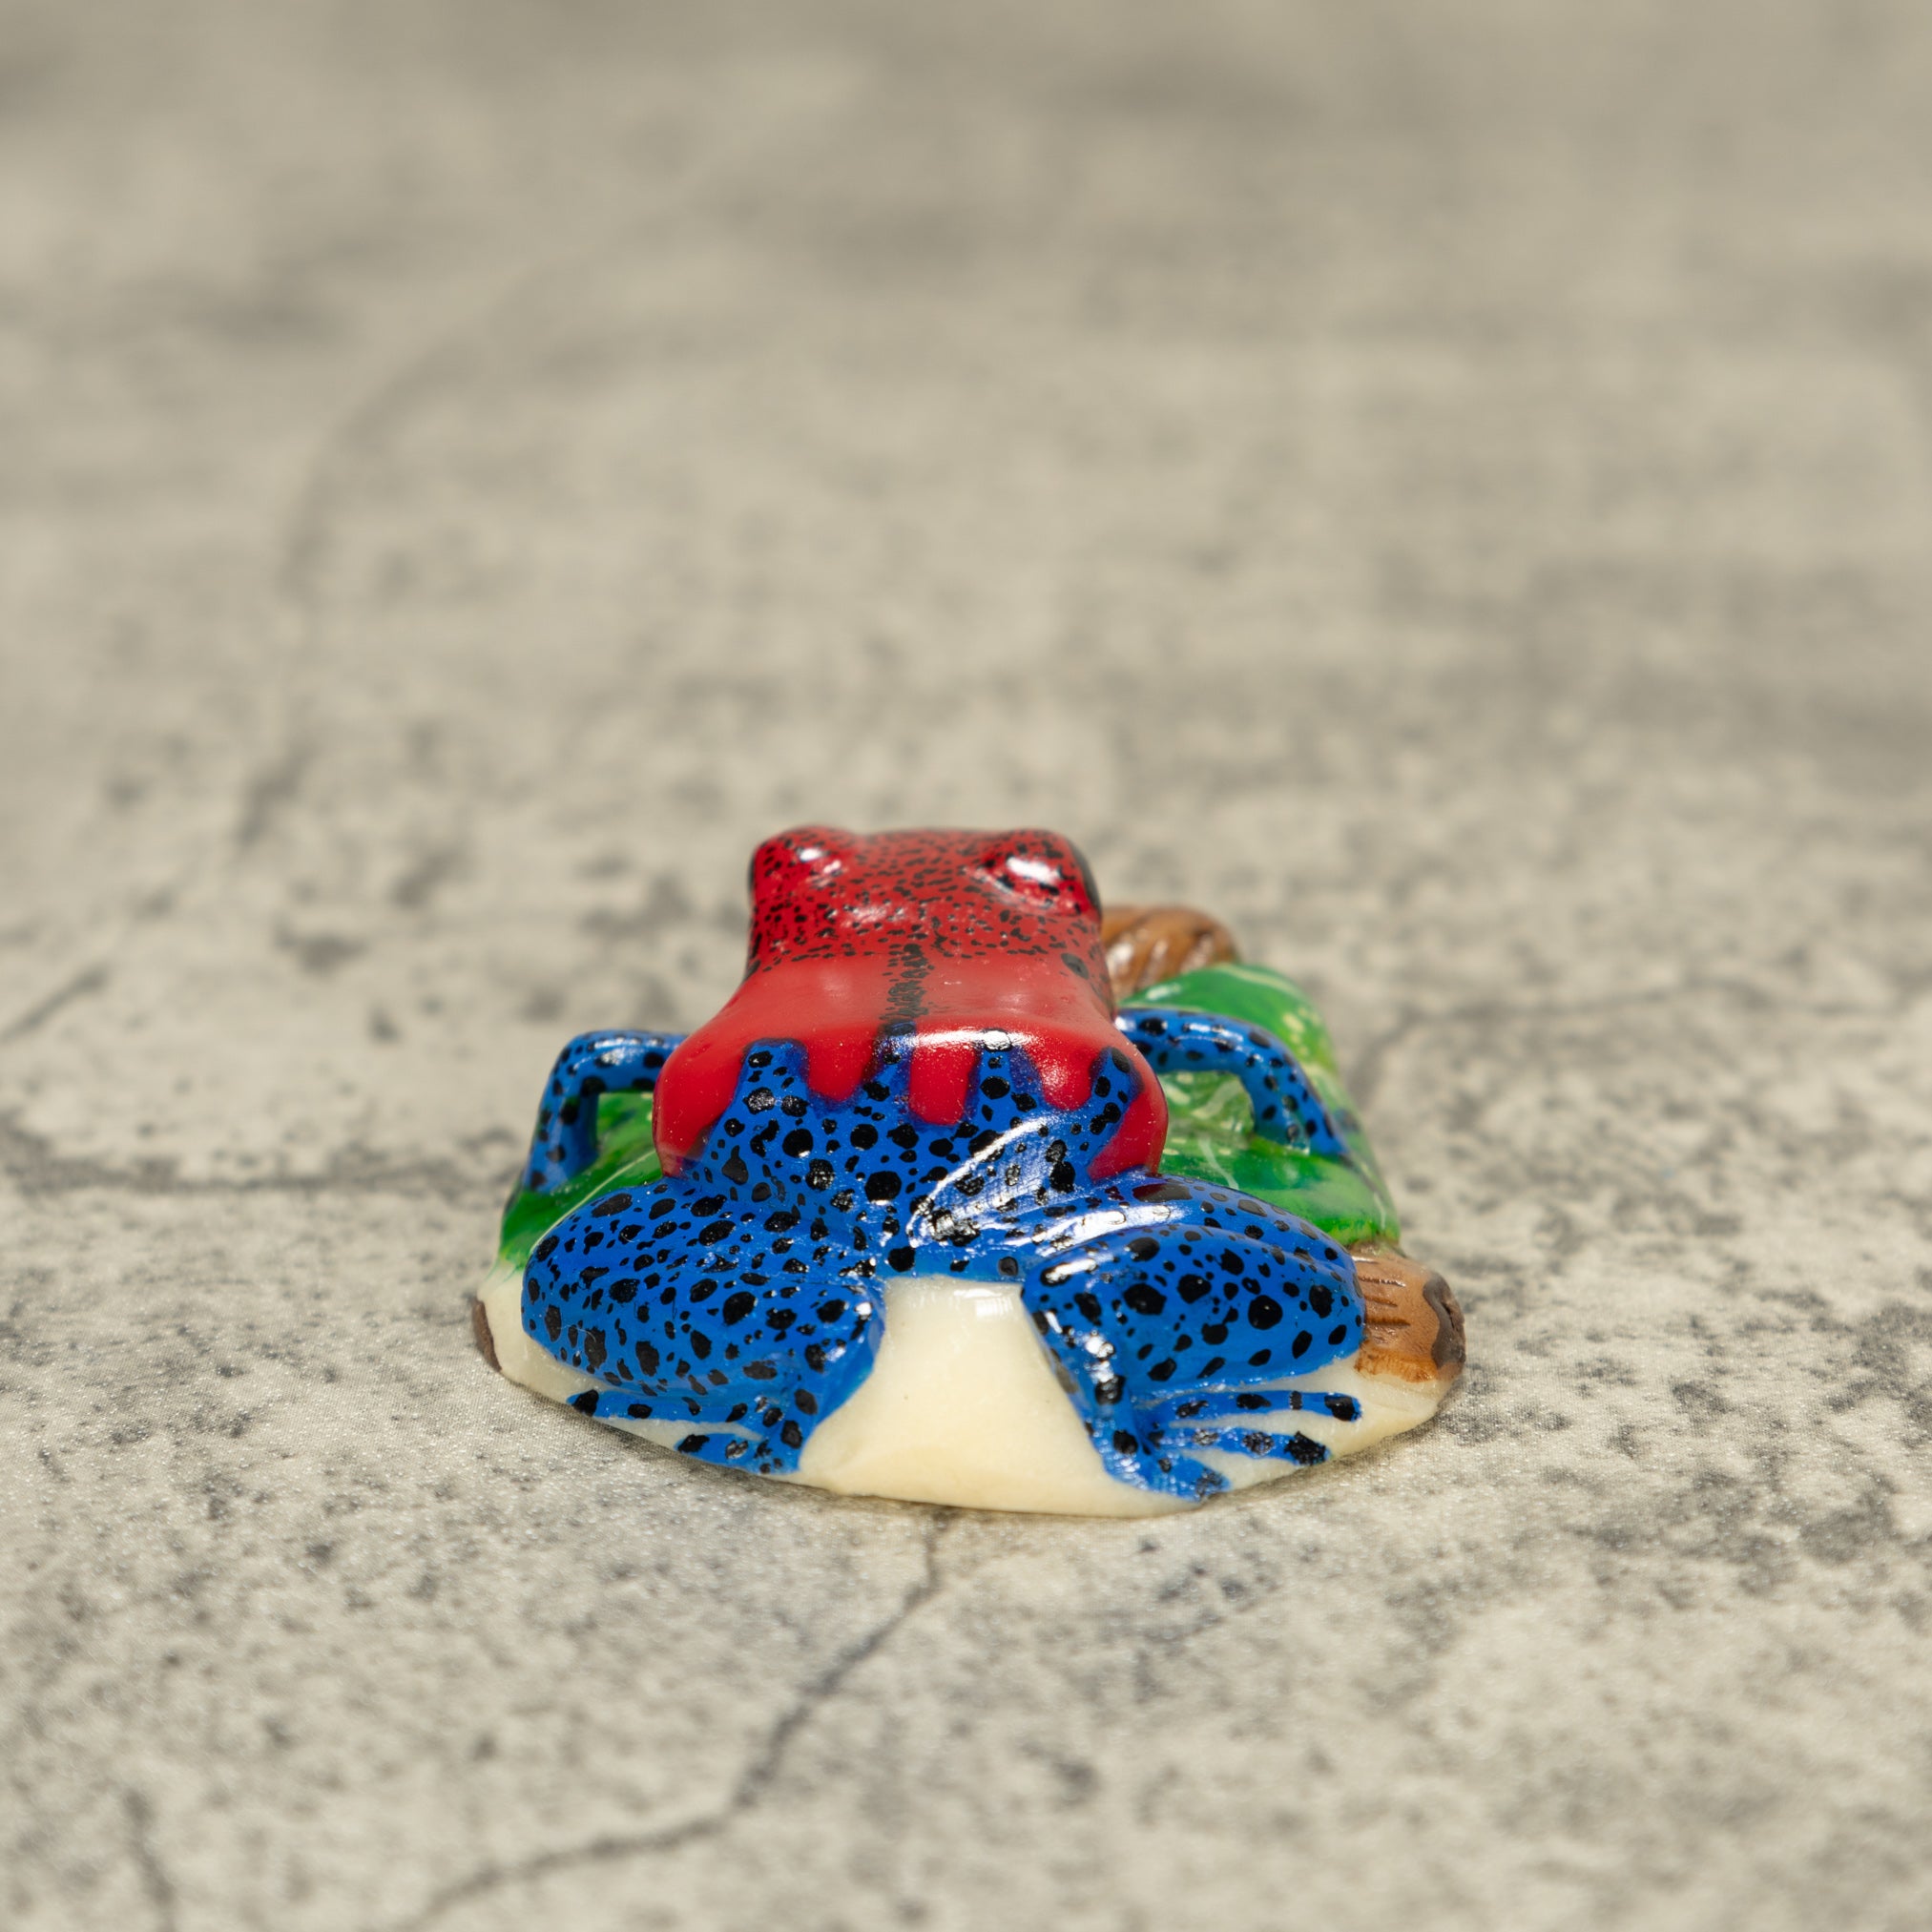 Red And Blue Poison Dart Frog Tagua Nut Carving